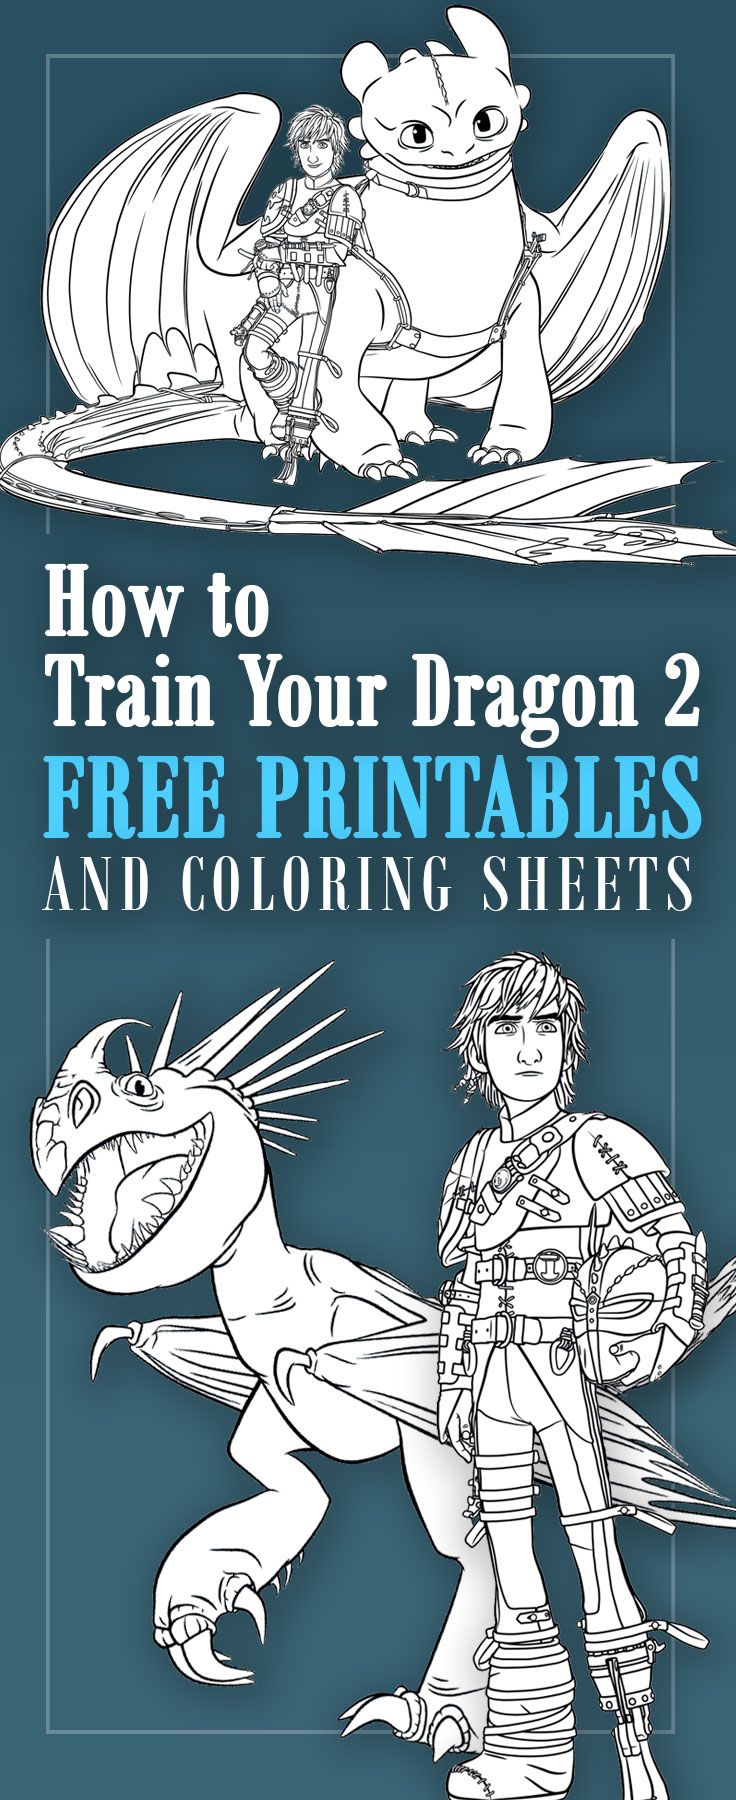 How to Train Your Dragon coloring pages and activity sheets